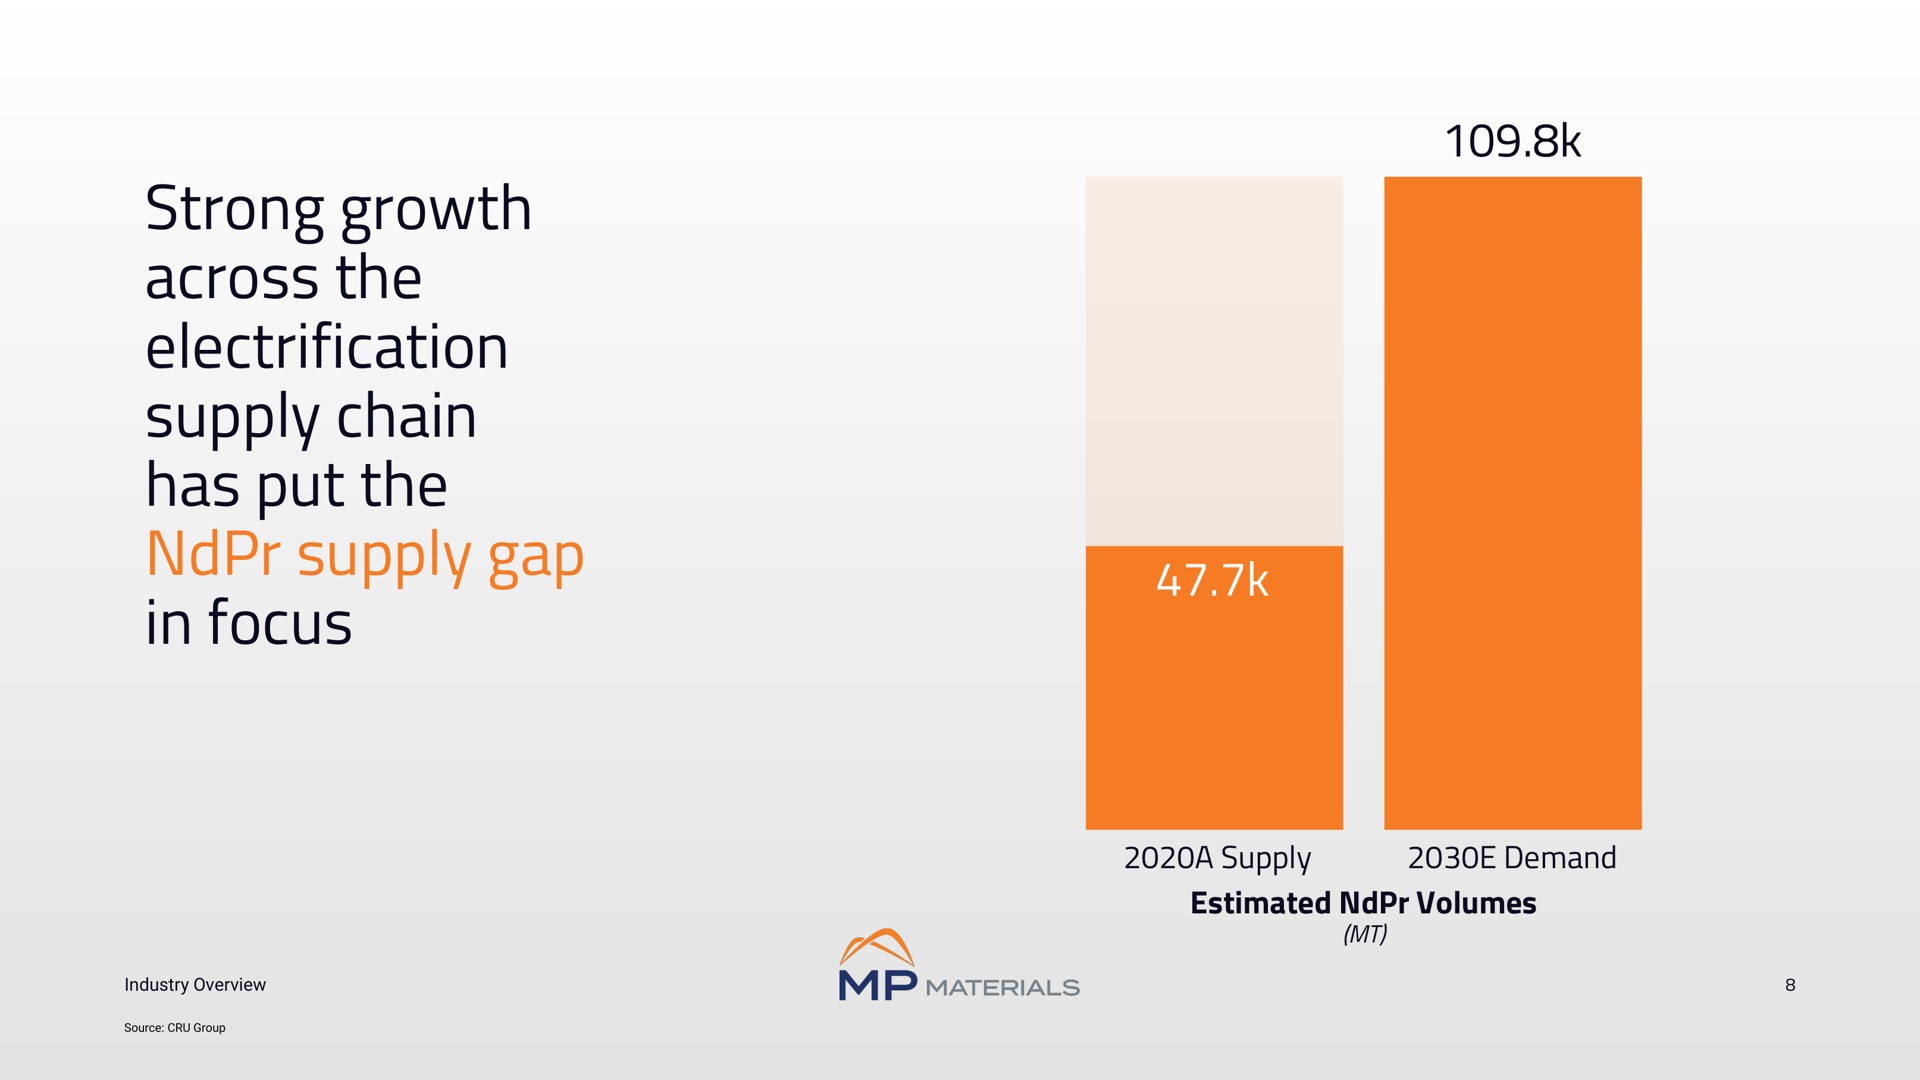 strong growth across the electrification supply chain has put the supply gap in focus a | MP Materials